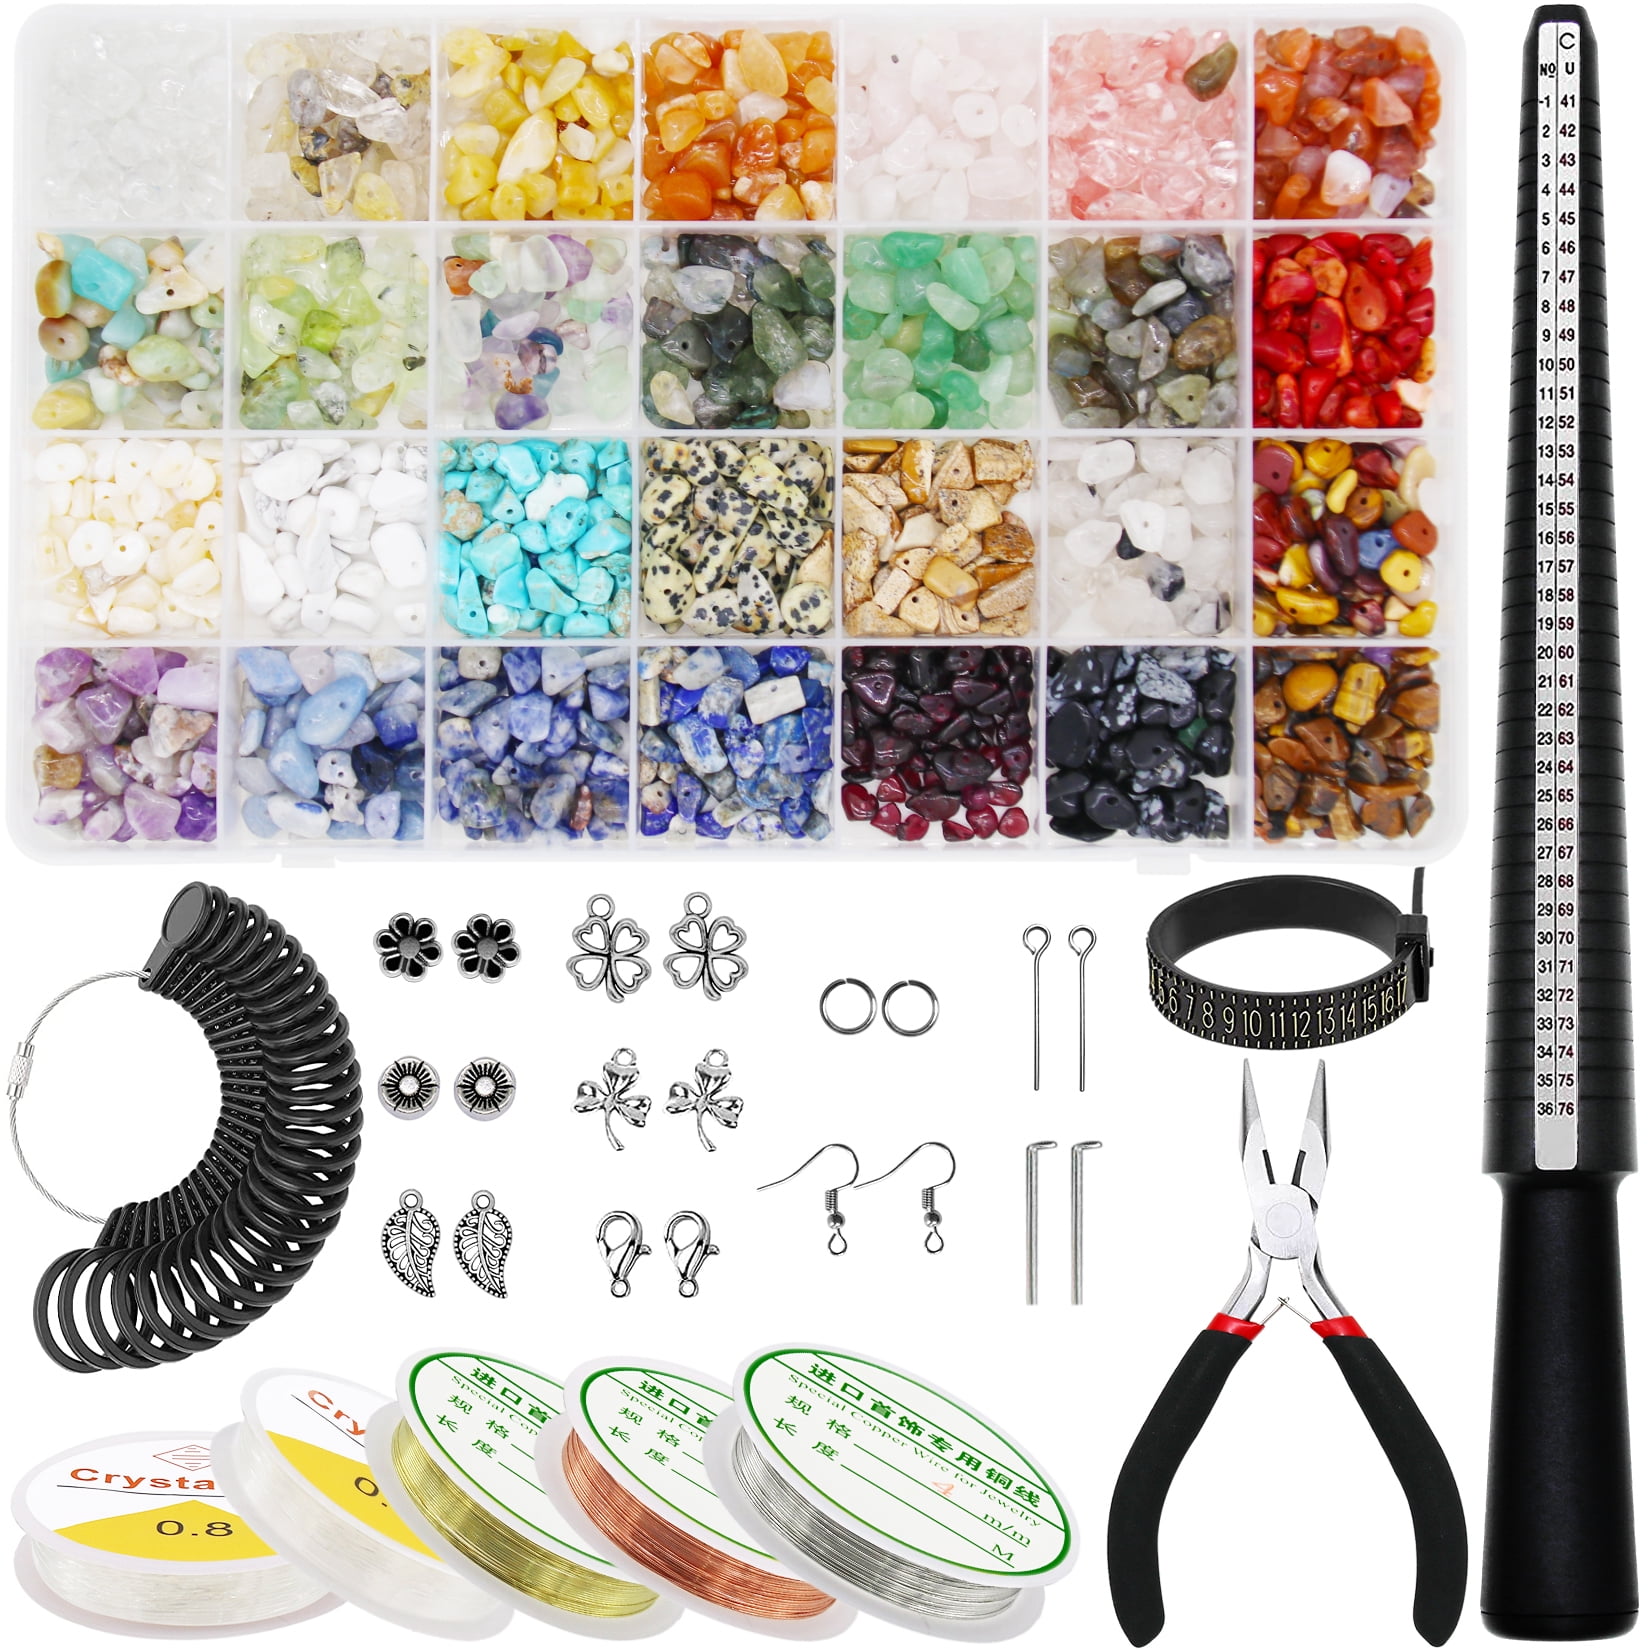 Wire Wrapping Kit 13 Pieces Wire Wrapped Jewelry Handmade Copper Jewelry  Jewelry Making Kits Hobby Tools Tool Kits Gift Ideas 